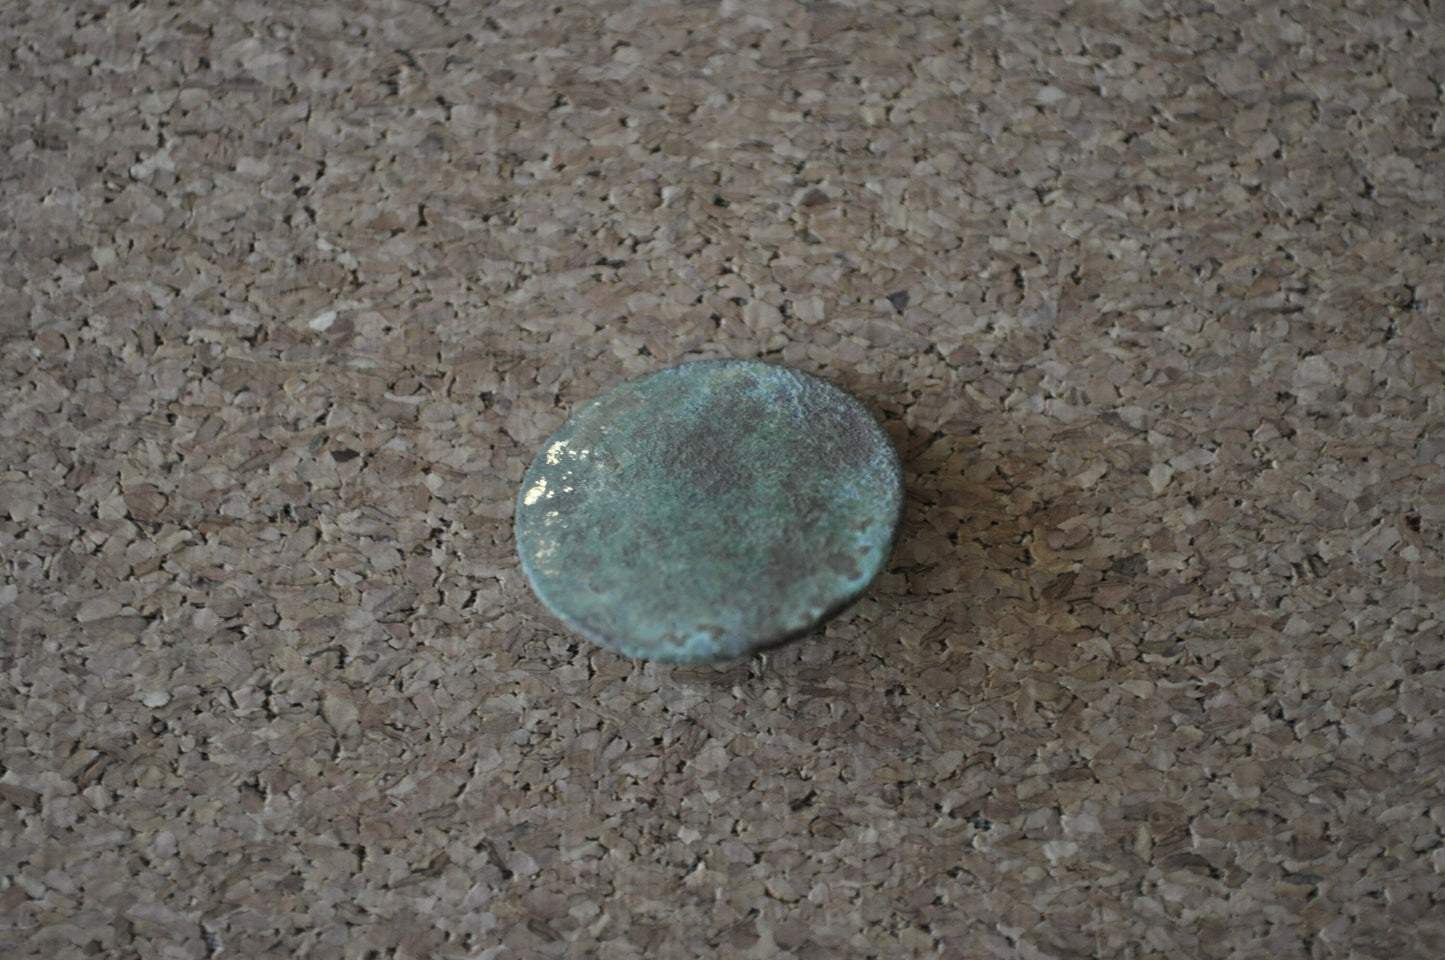 Old Copper / Brass Vintage Buttons and Pins Found metal detecting